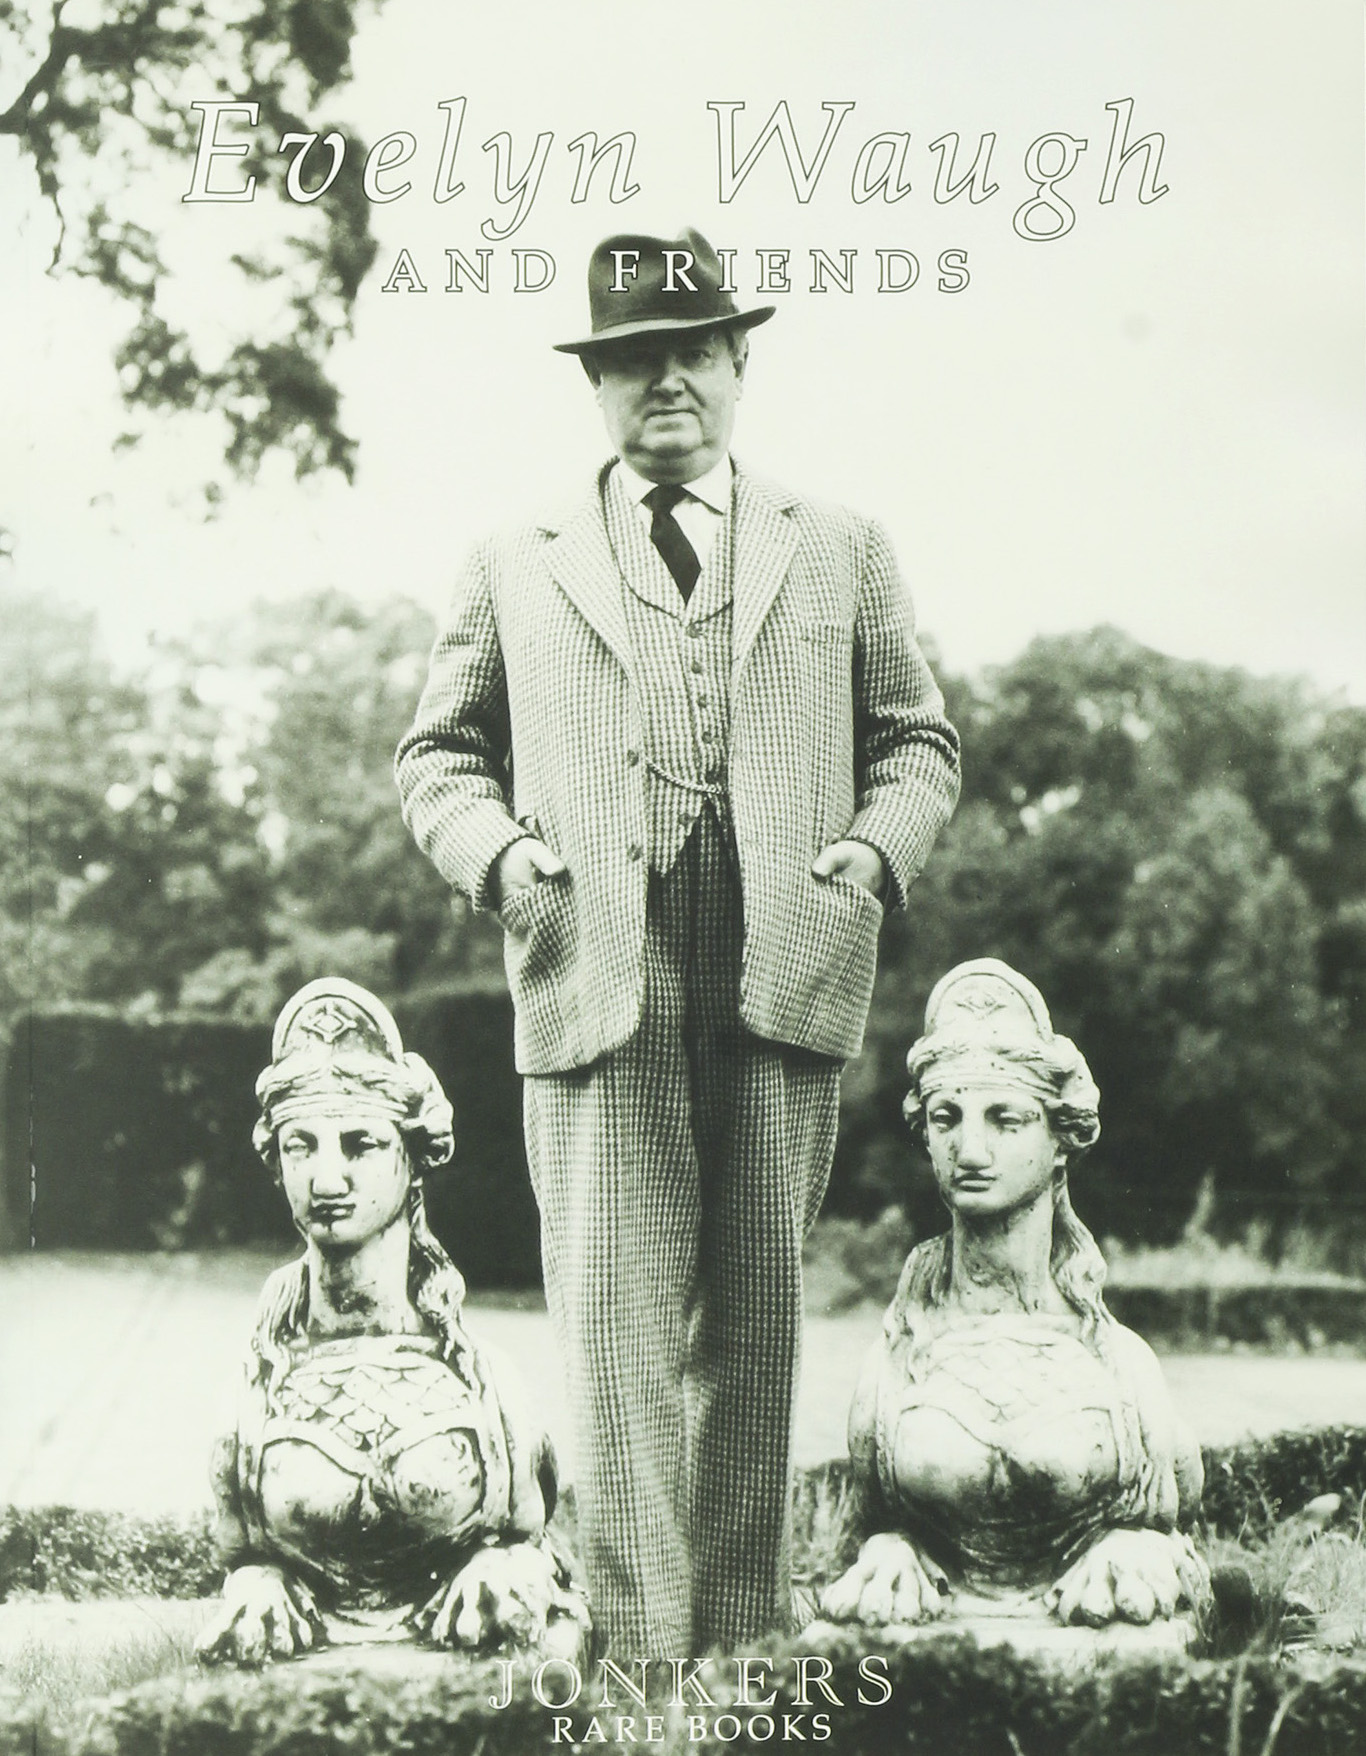 Evelyn Waugh and Friends - , 